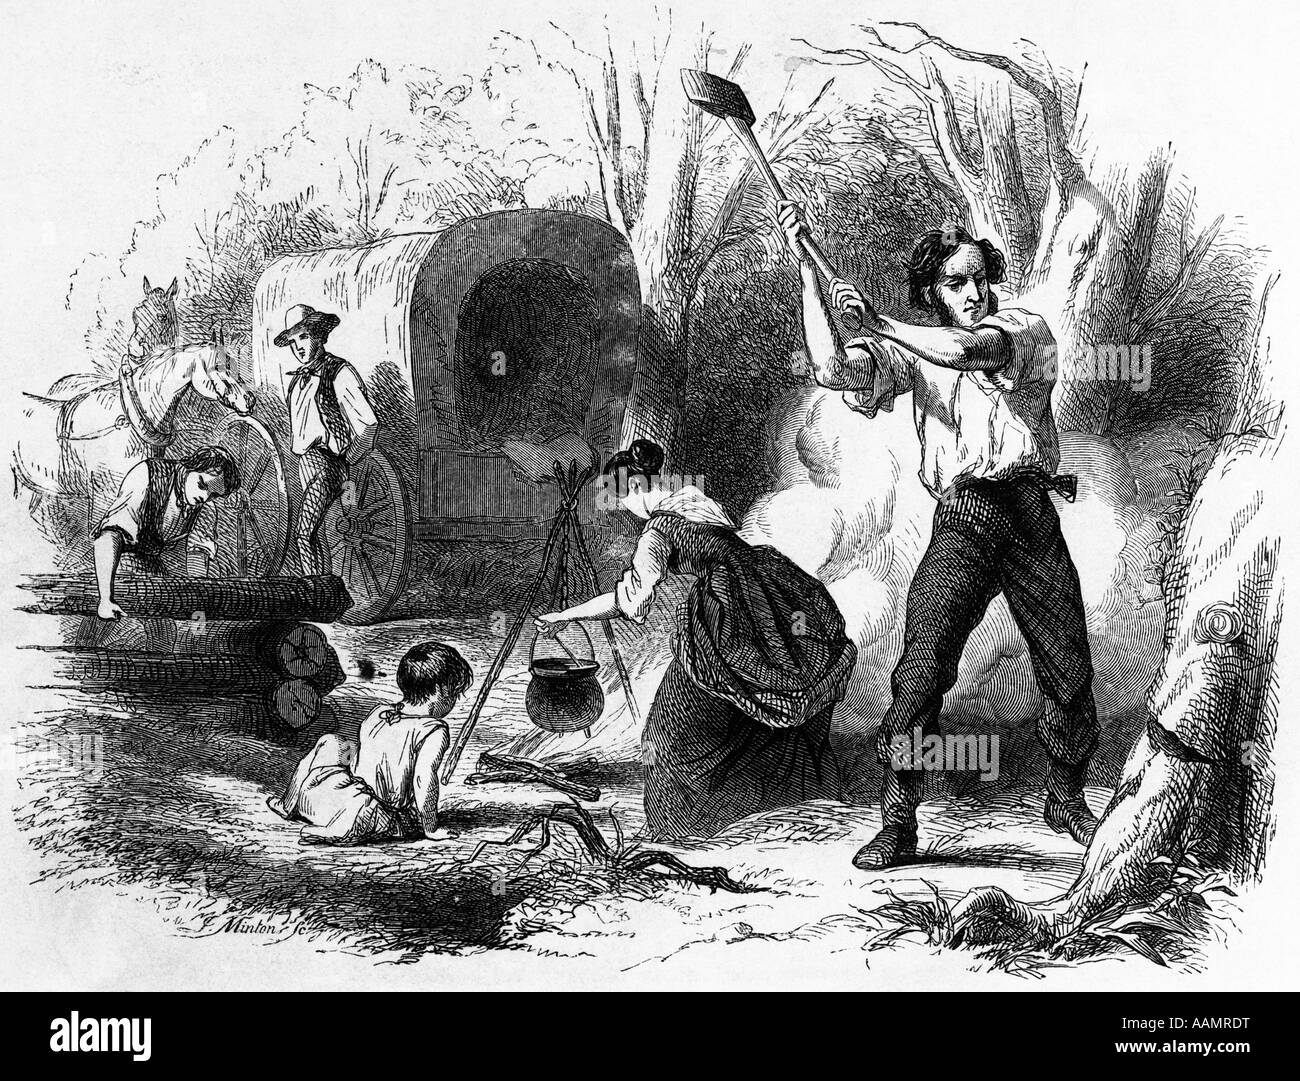 1800s DRAWING FRONTIER PIONEER SETTLERS MAN WITH AX CHOPPING TREE WOMAN CHILD AROUND CAMP FIRE AND CONESTOGA COVERED WAGON IN Stock Photo